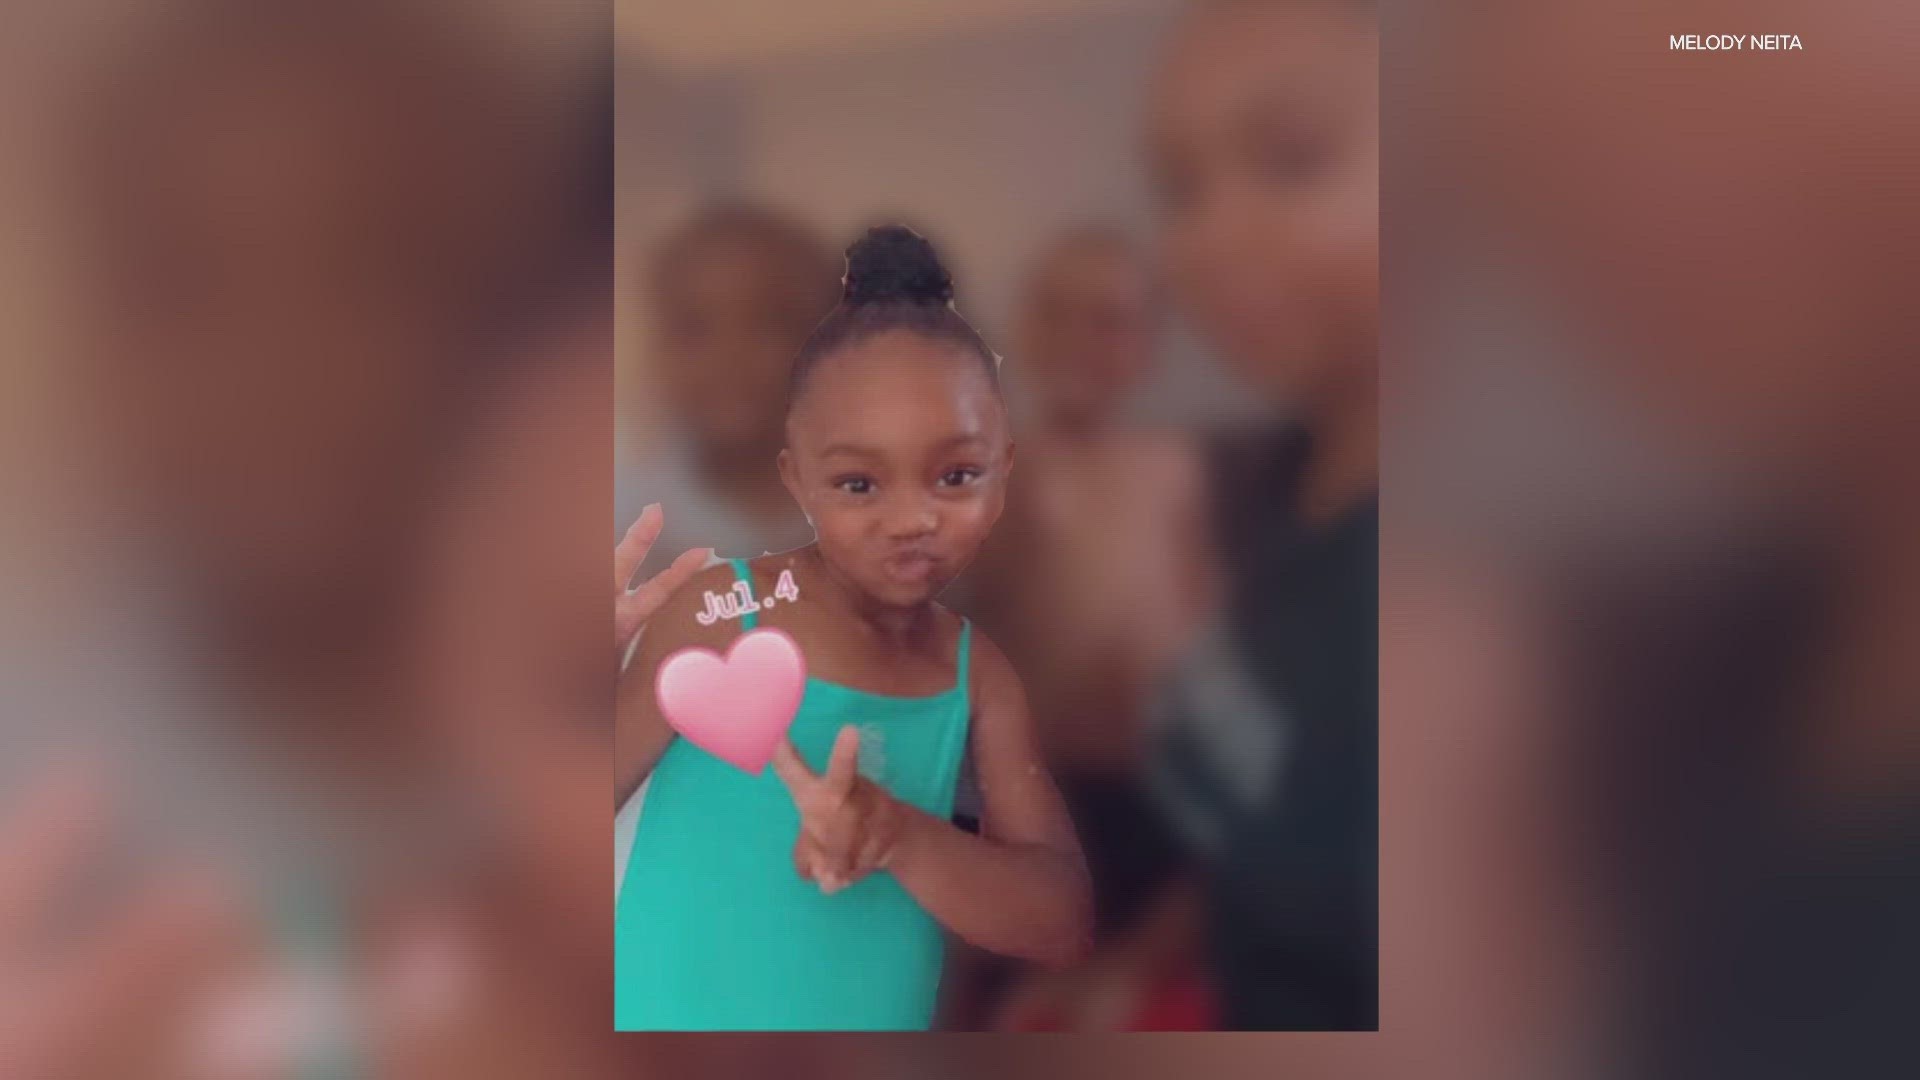 Download Porn Videos Rep Mom - Mom grieves death of 4-year-old daughter shot by her brother | wthr.com